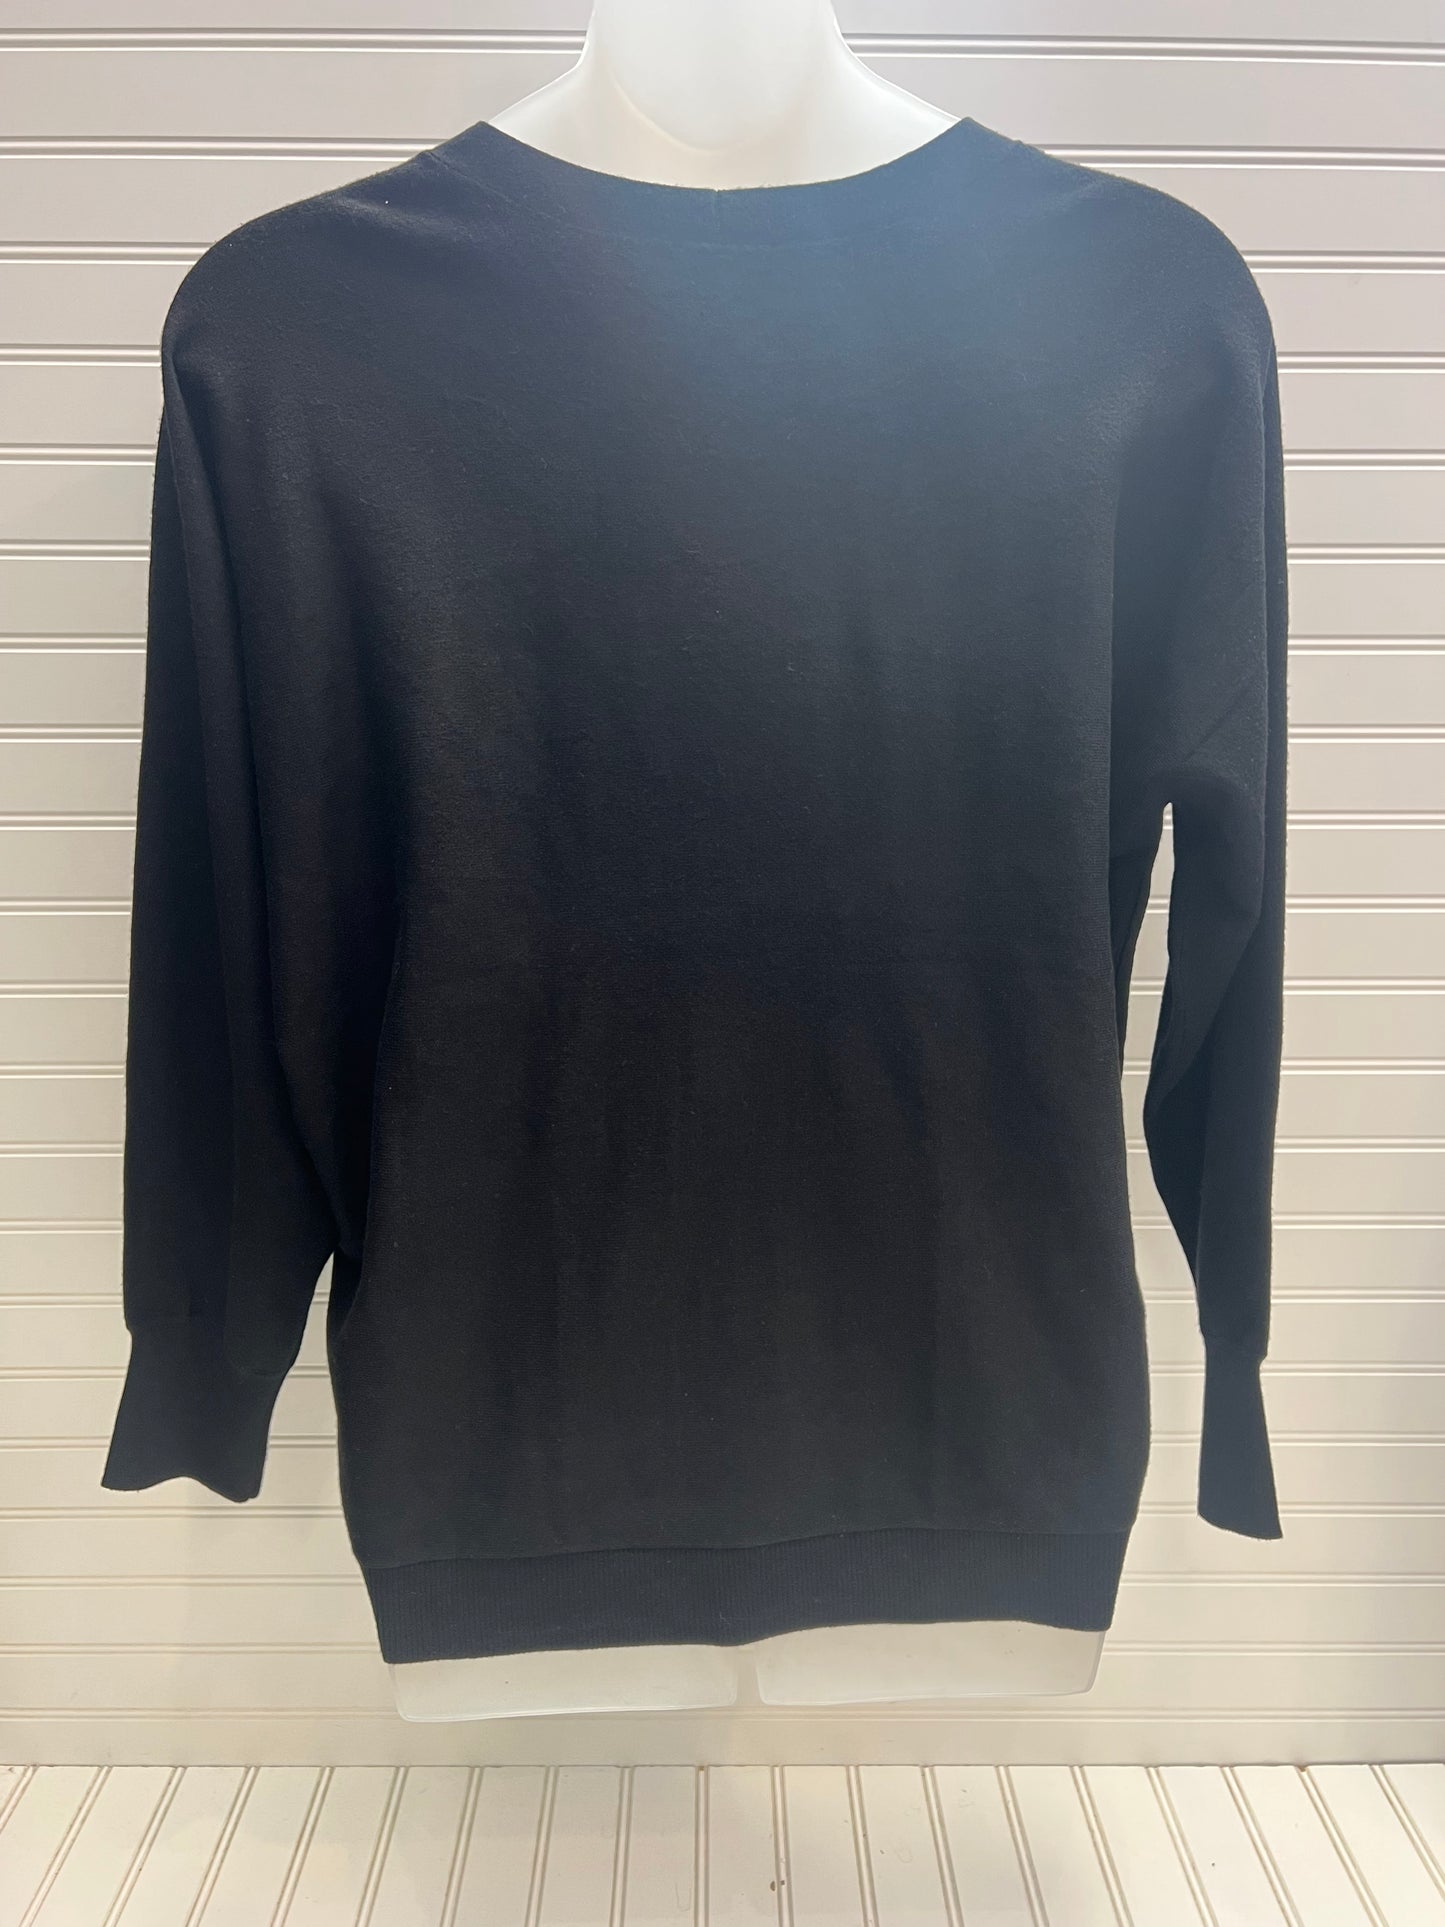 Sweater By Chicos  Size: 2x